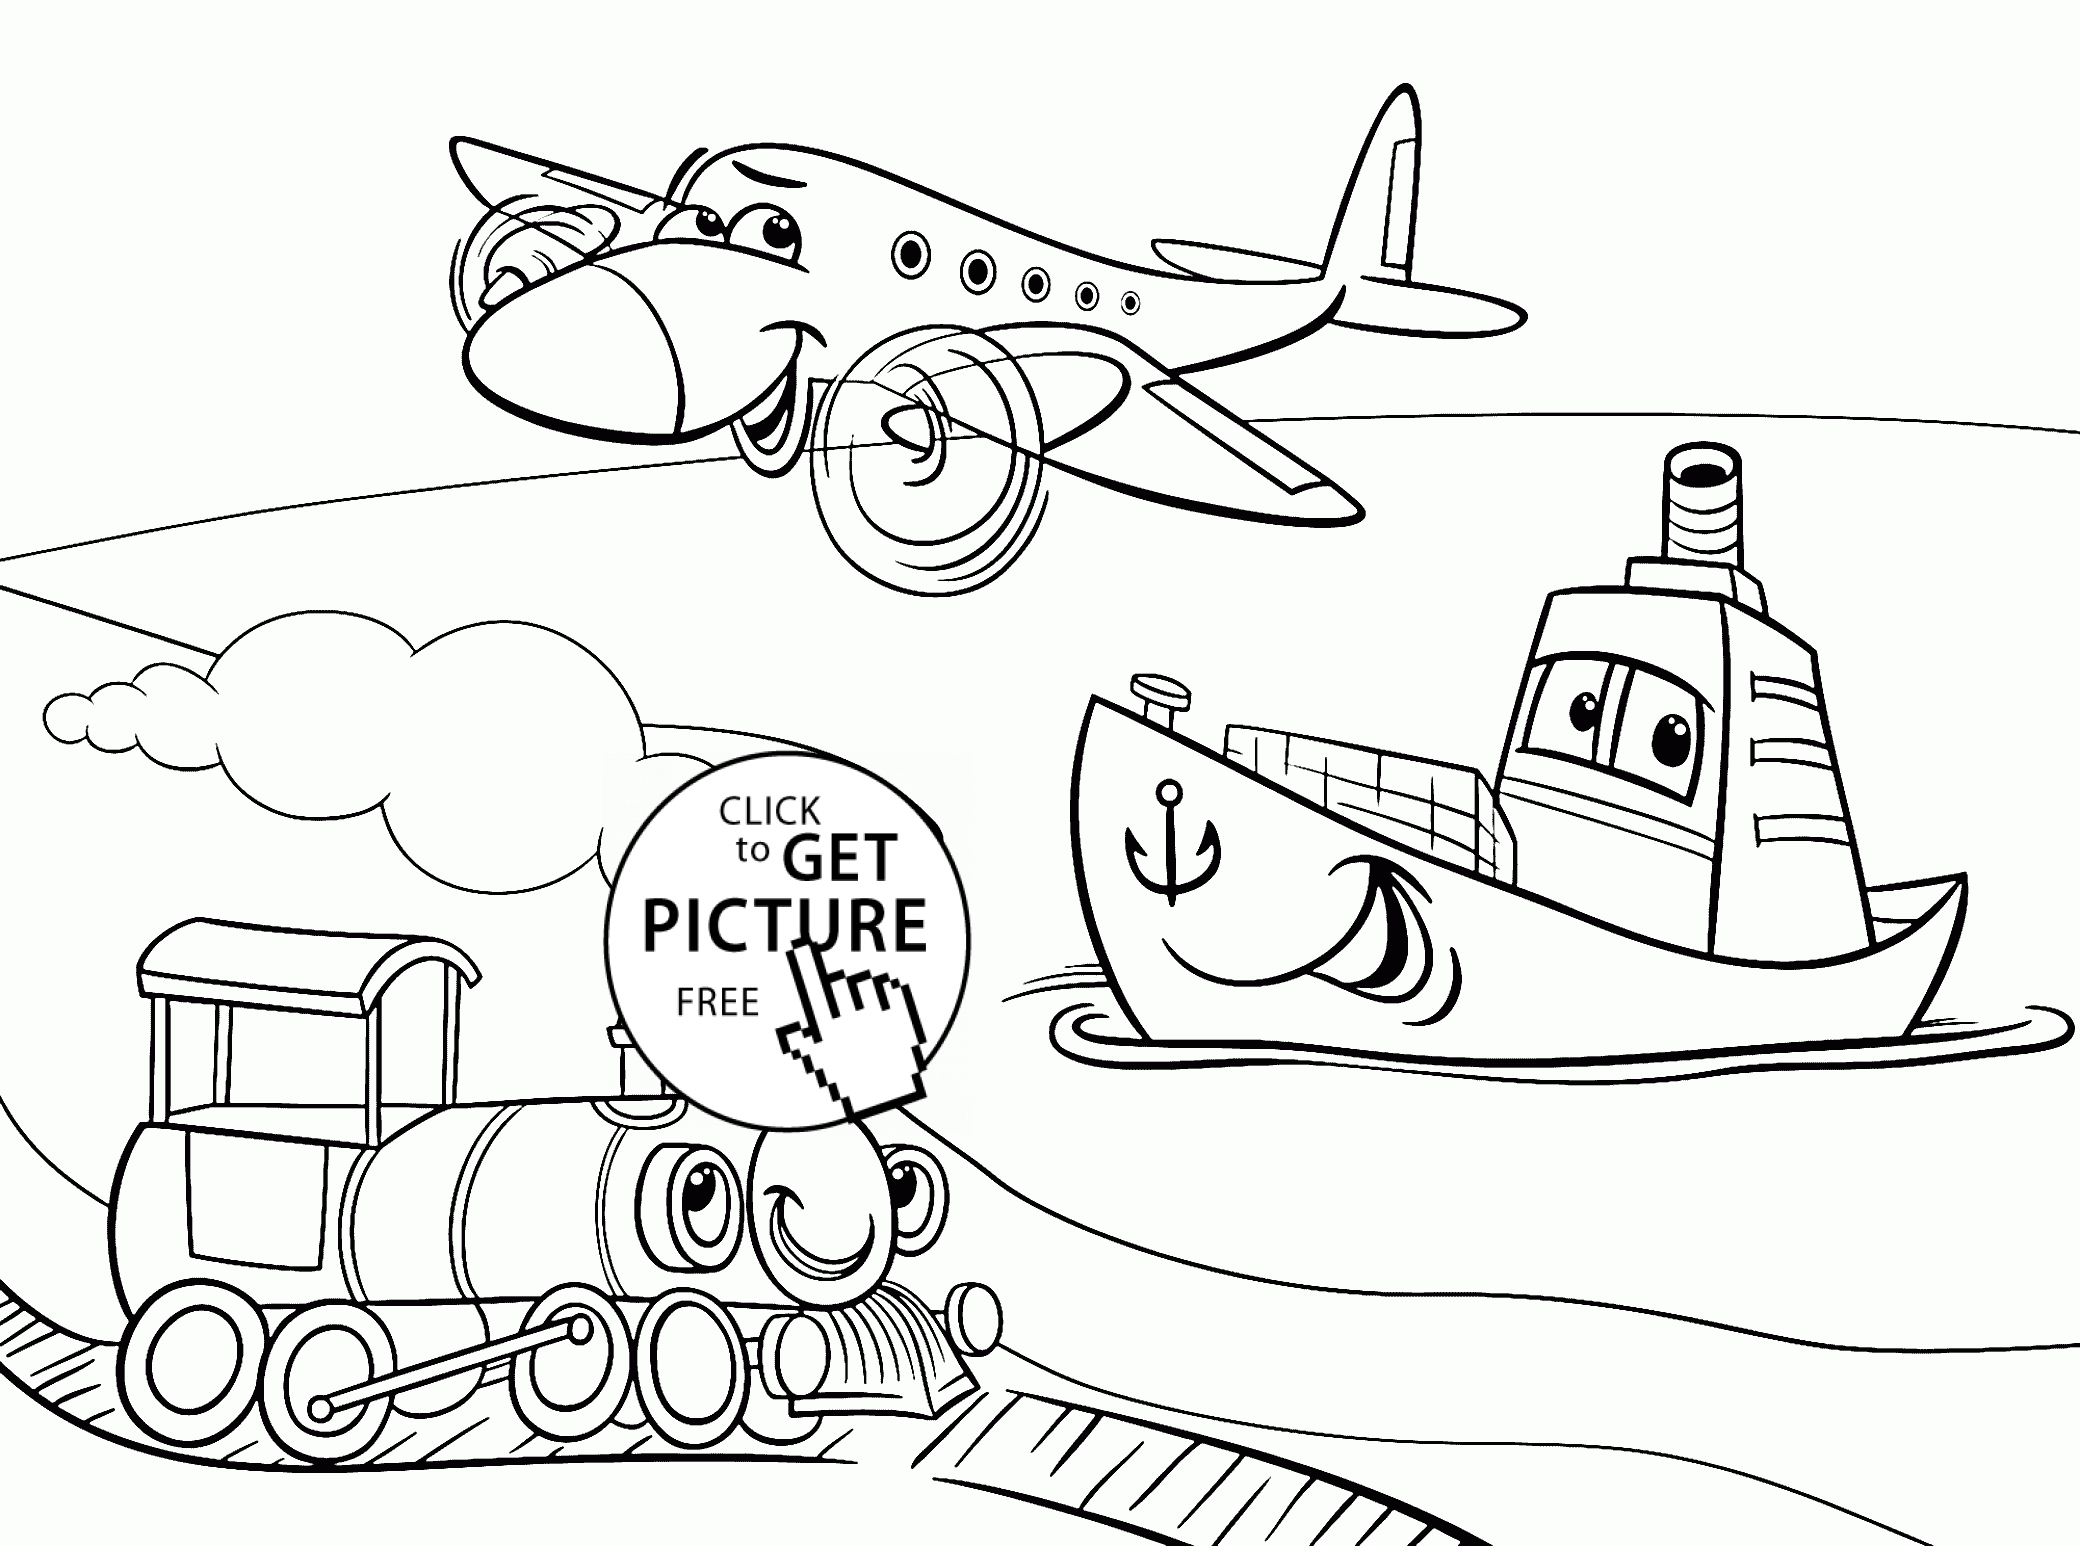 transportation coloring pages for kids air transportation coloring pages coloring home coloring pages transportation kids for 